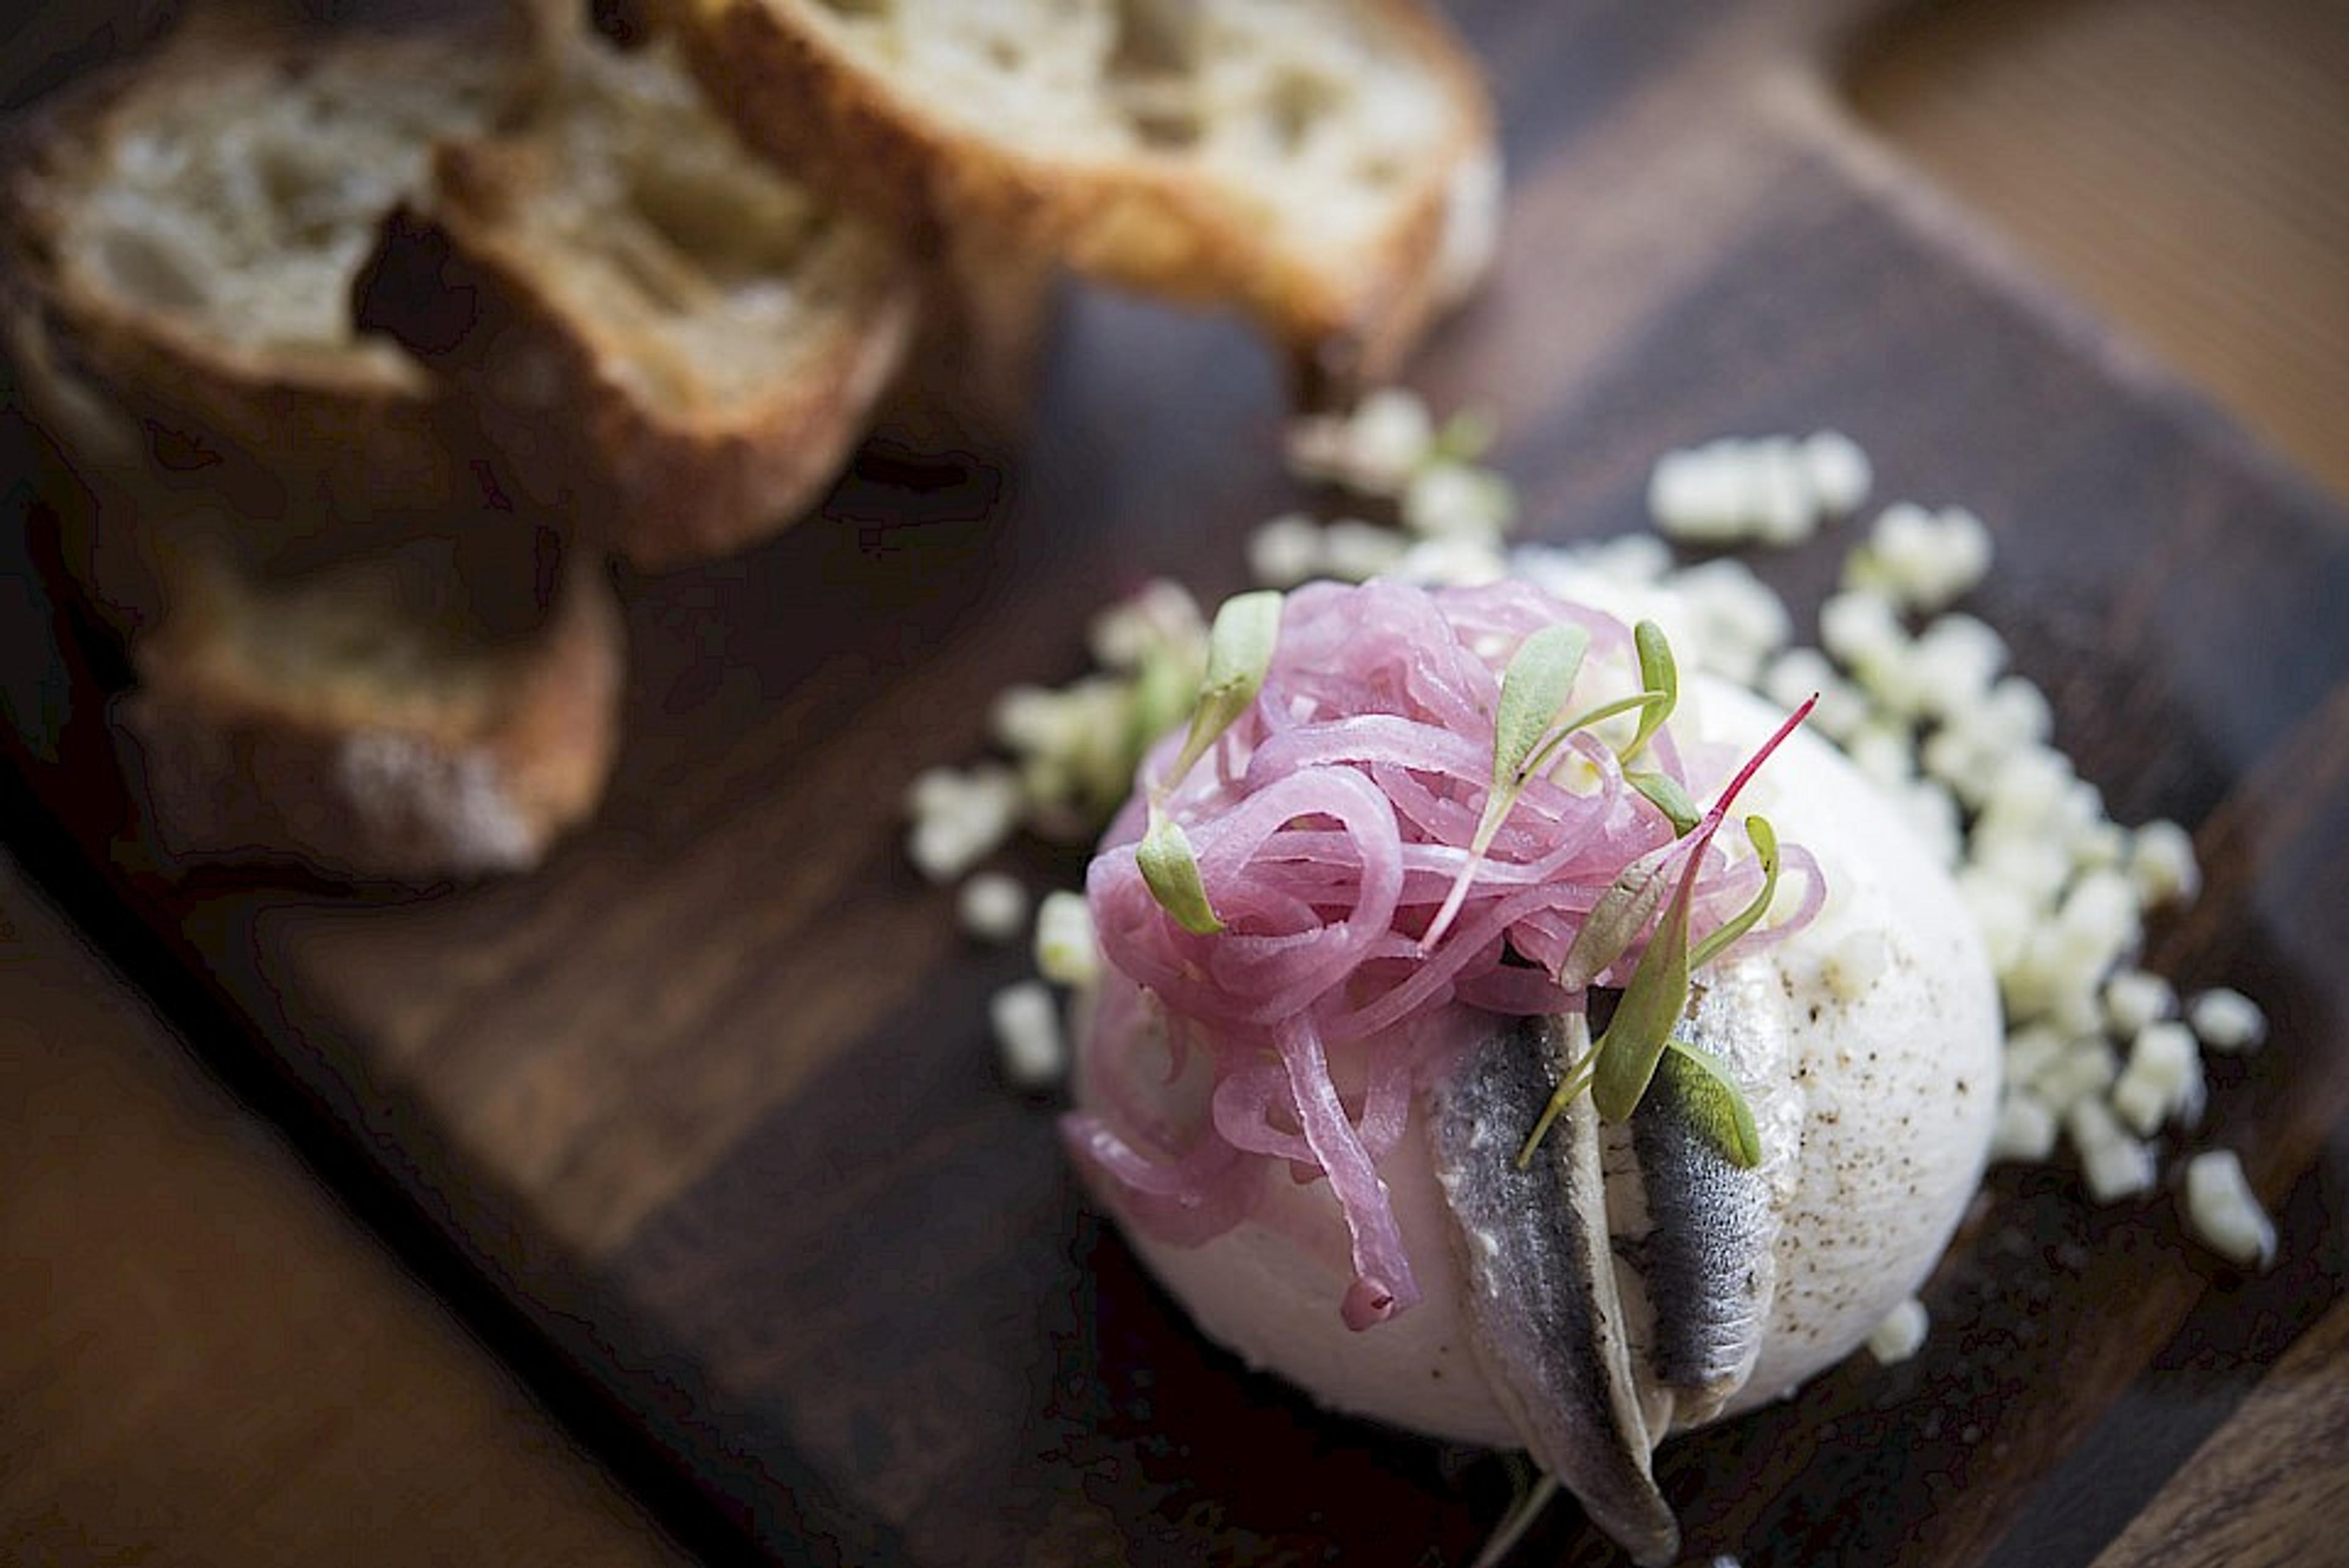 Burrata with pickled white anchovies, pickled onion, apple